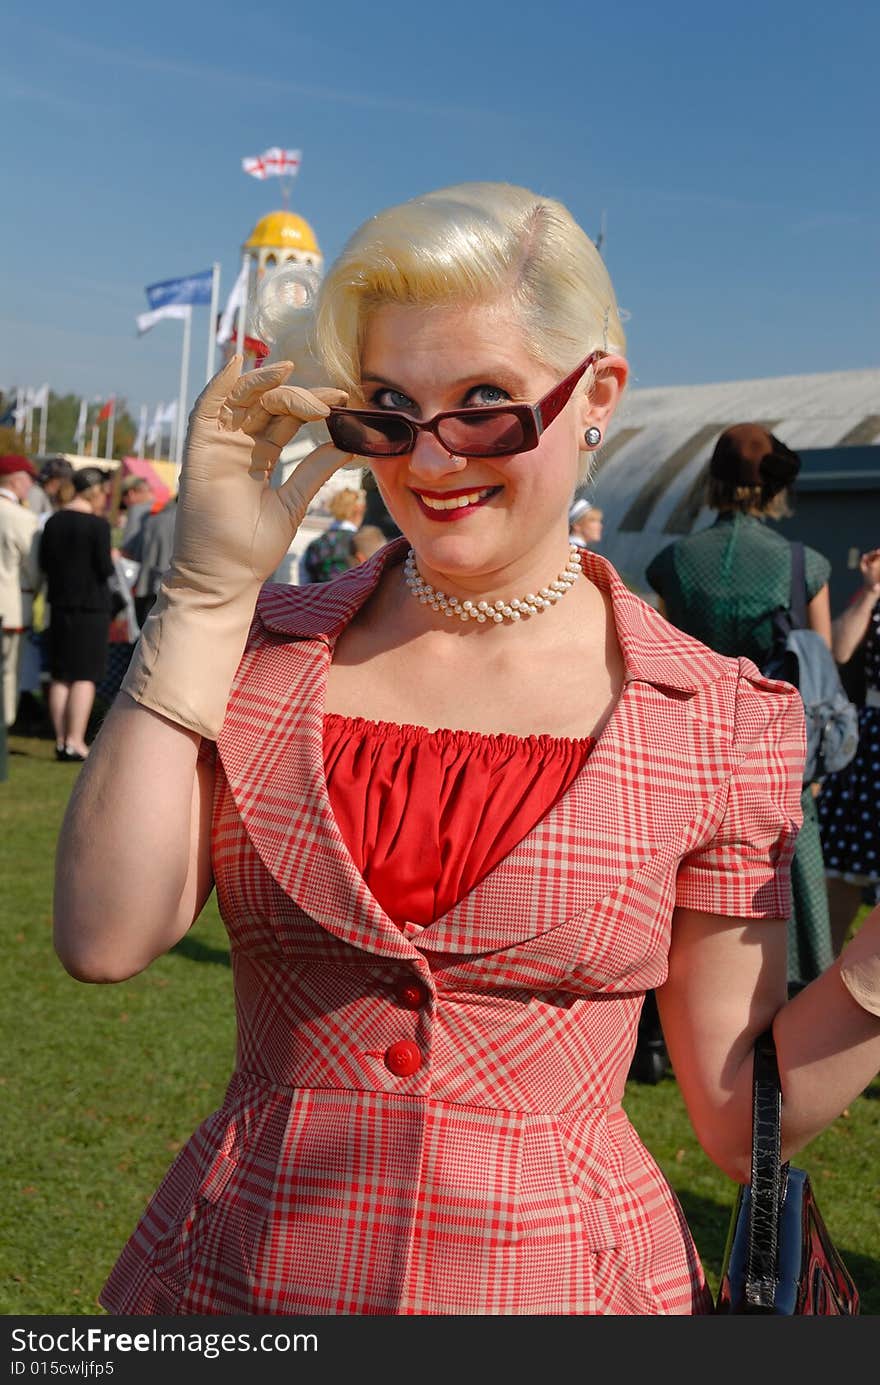 Fifties vintage costume at Goodwood Revival event, UK. Fifties vintage costume at Goodwood Revival event, UK